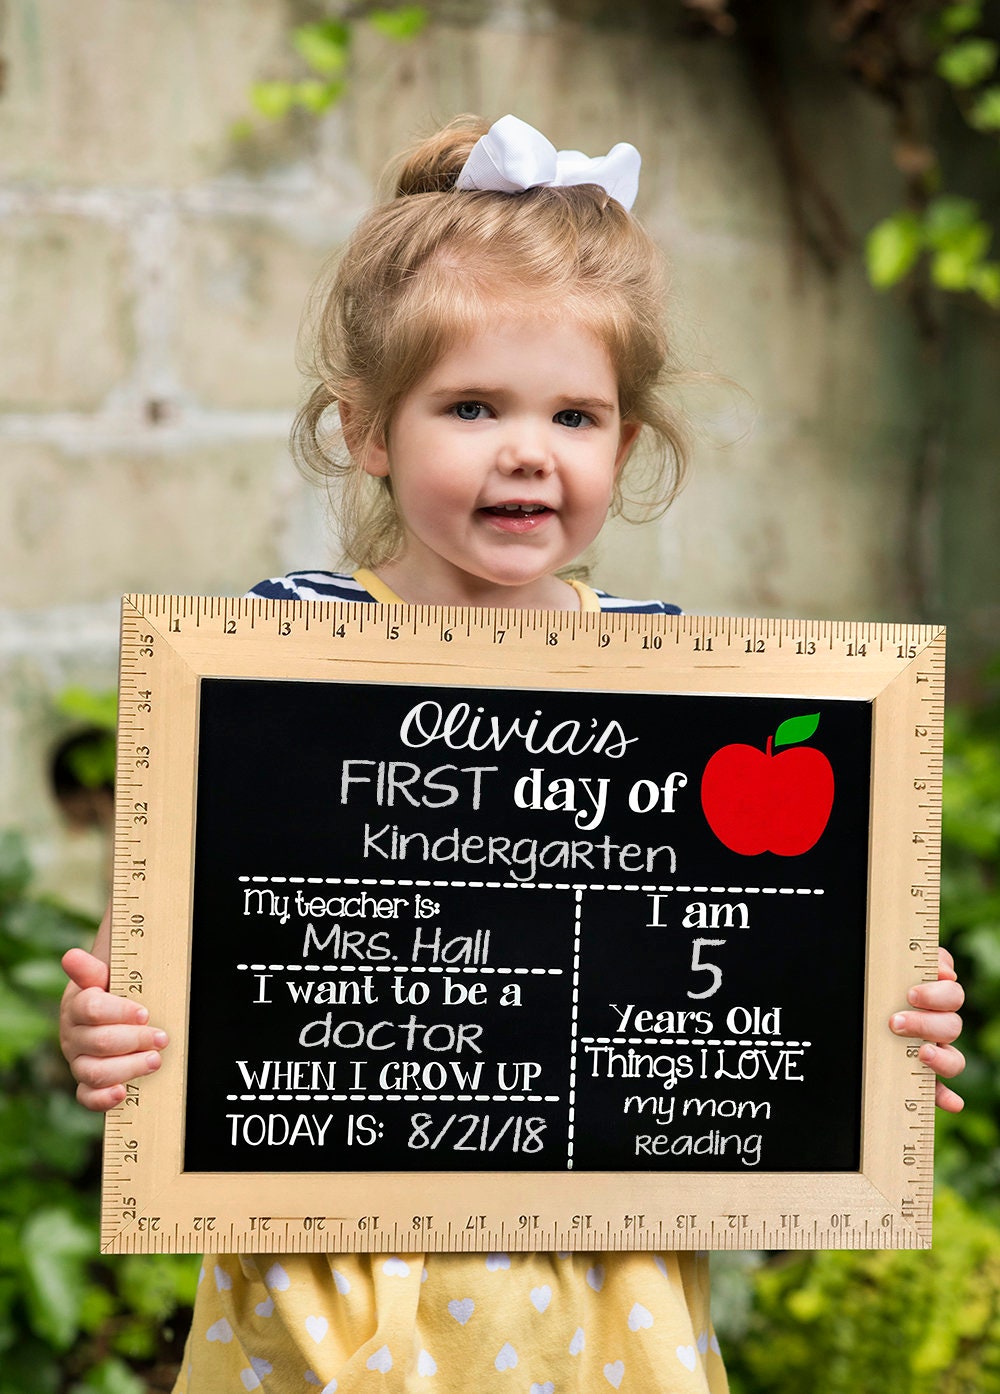 First Day of School Board School Sign Chalkboard Student Message Board Back to School Supply, Size: 30.50